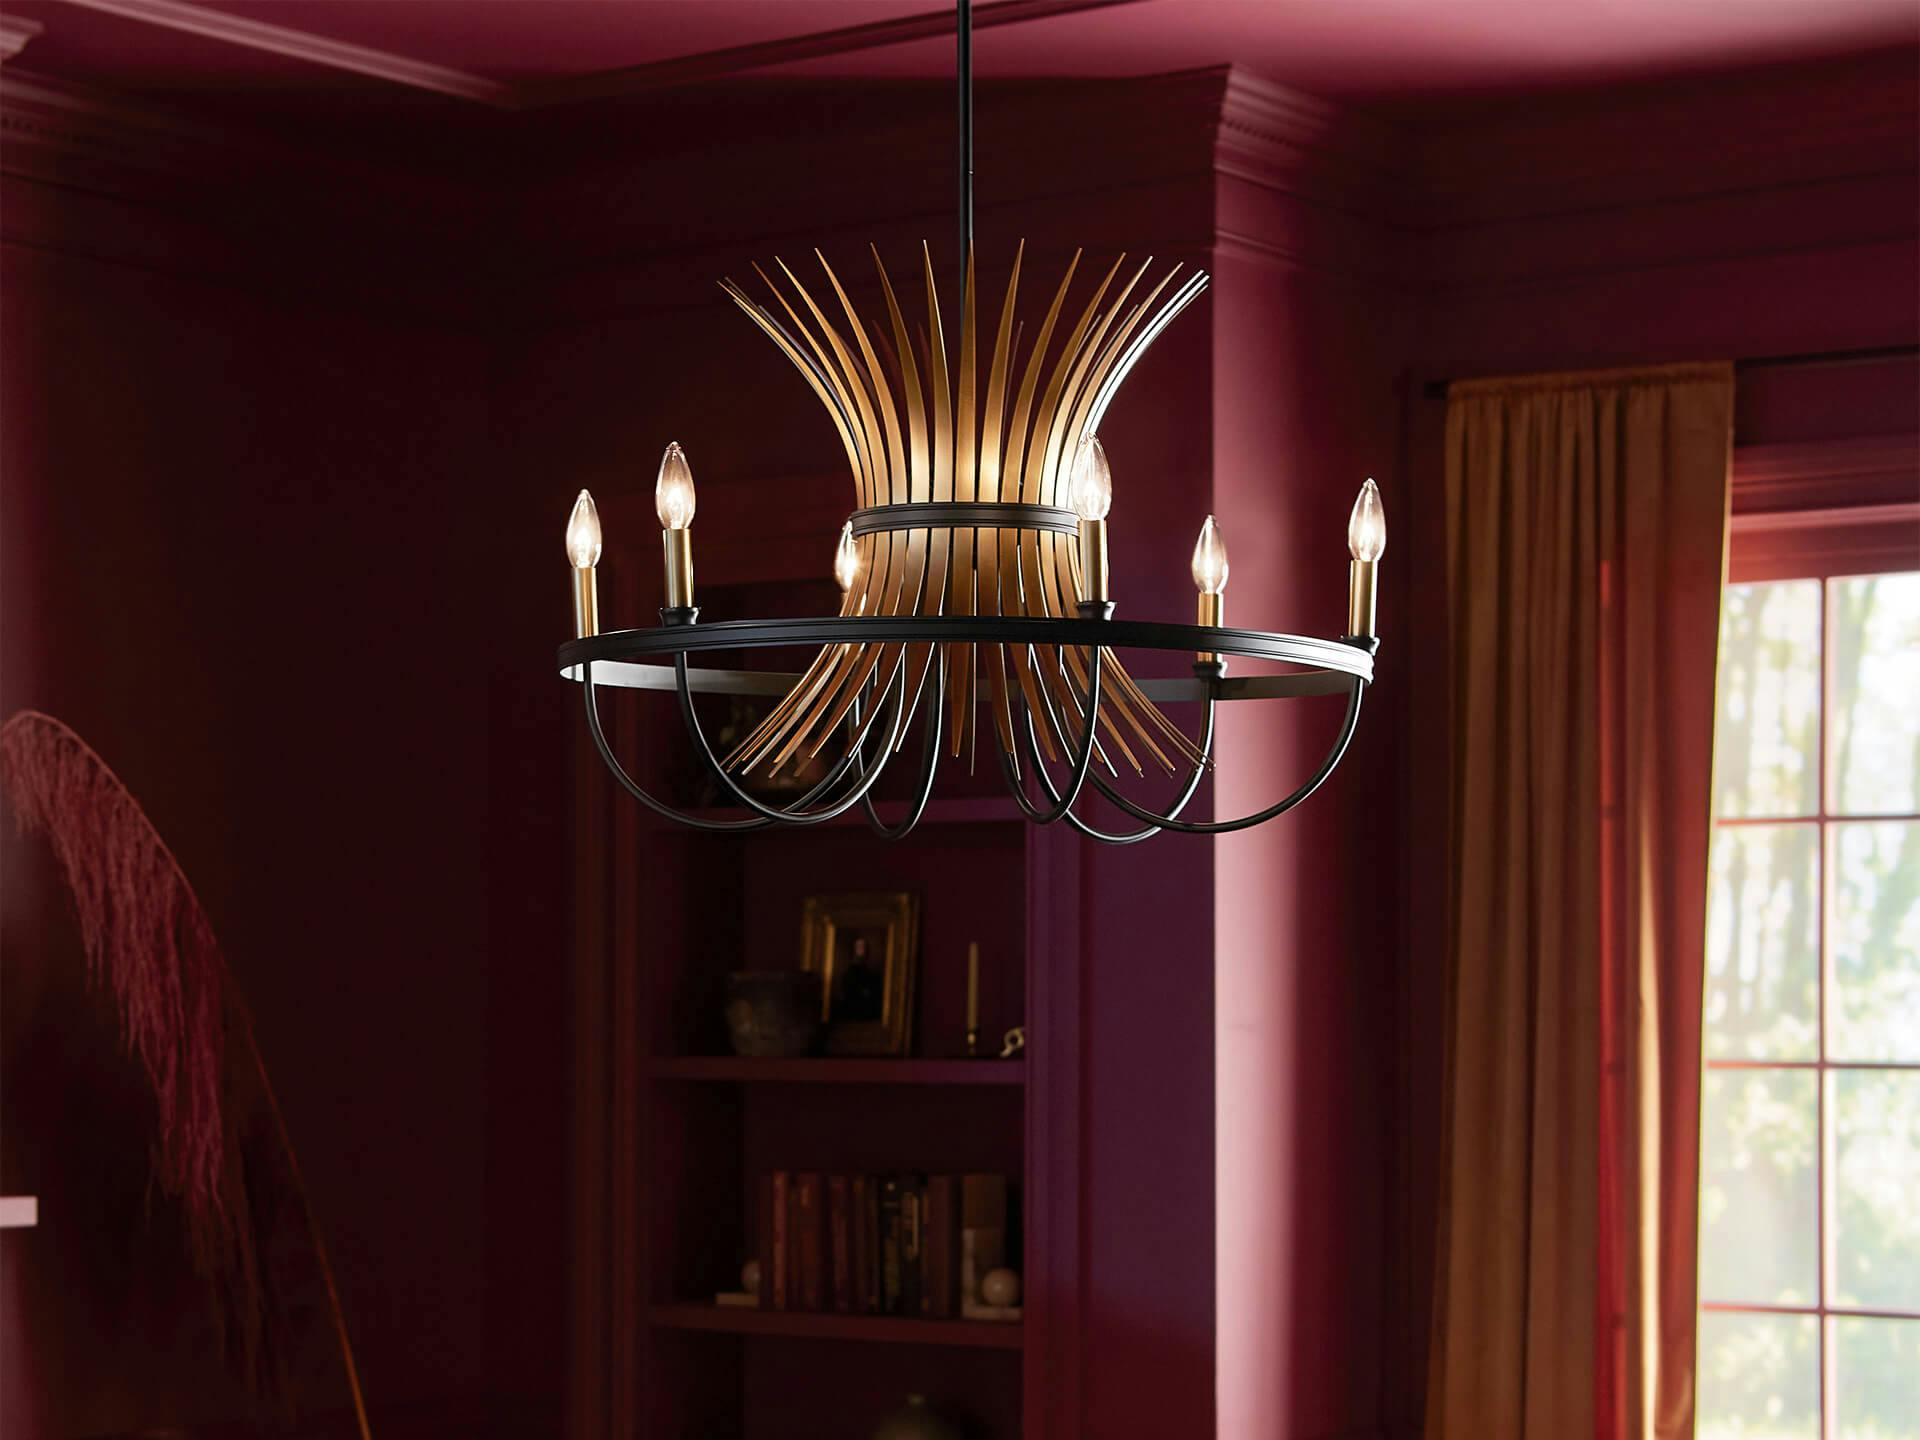 Baile chandelier illuminated in a deep red room